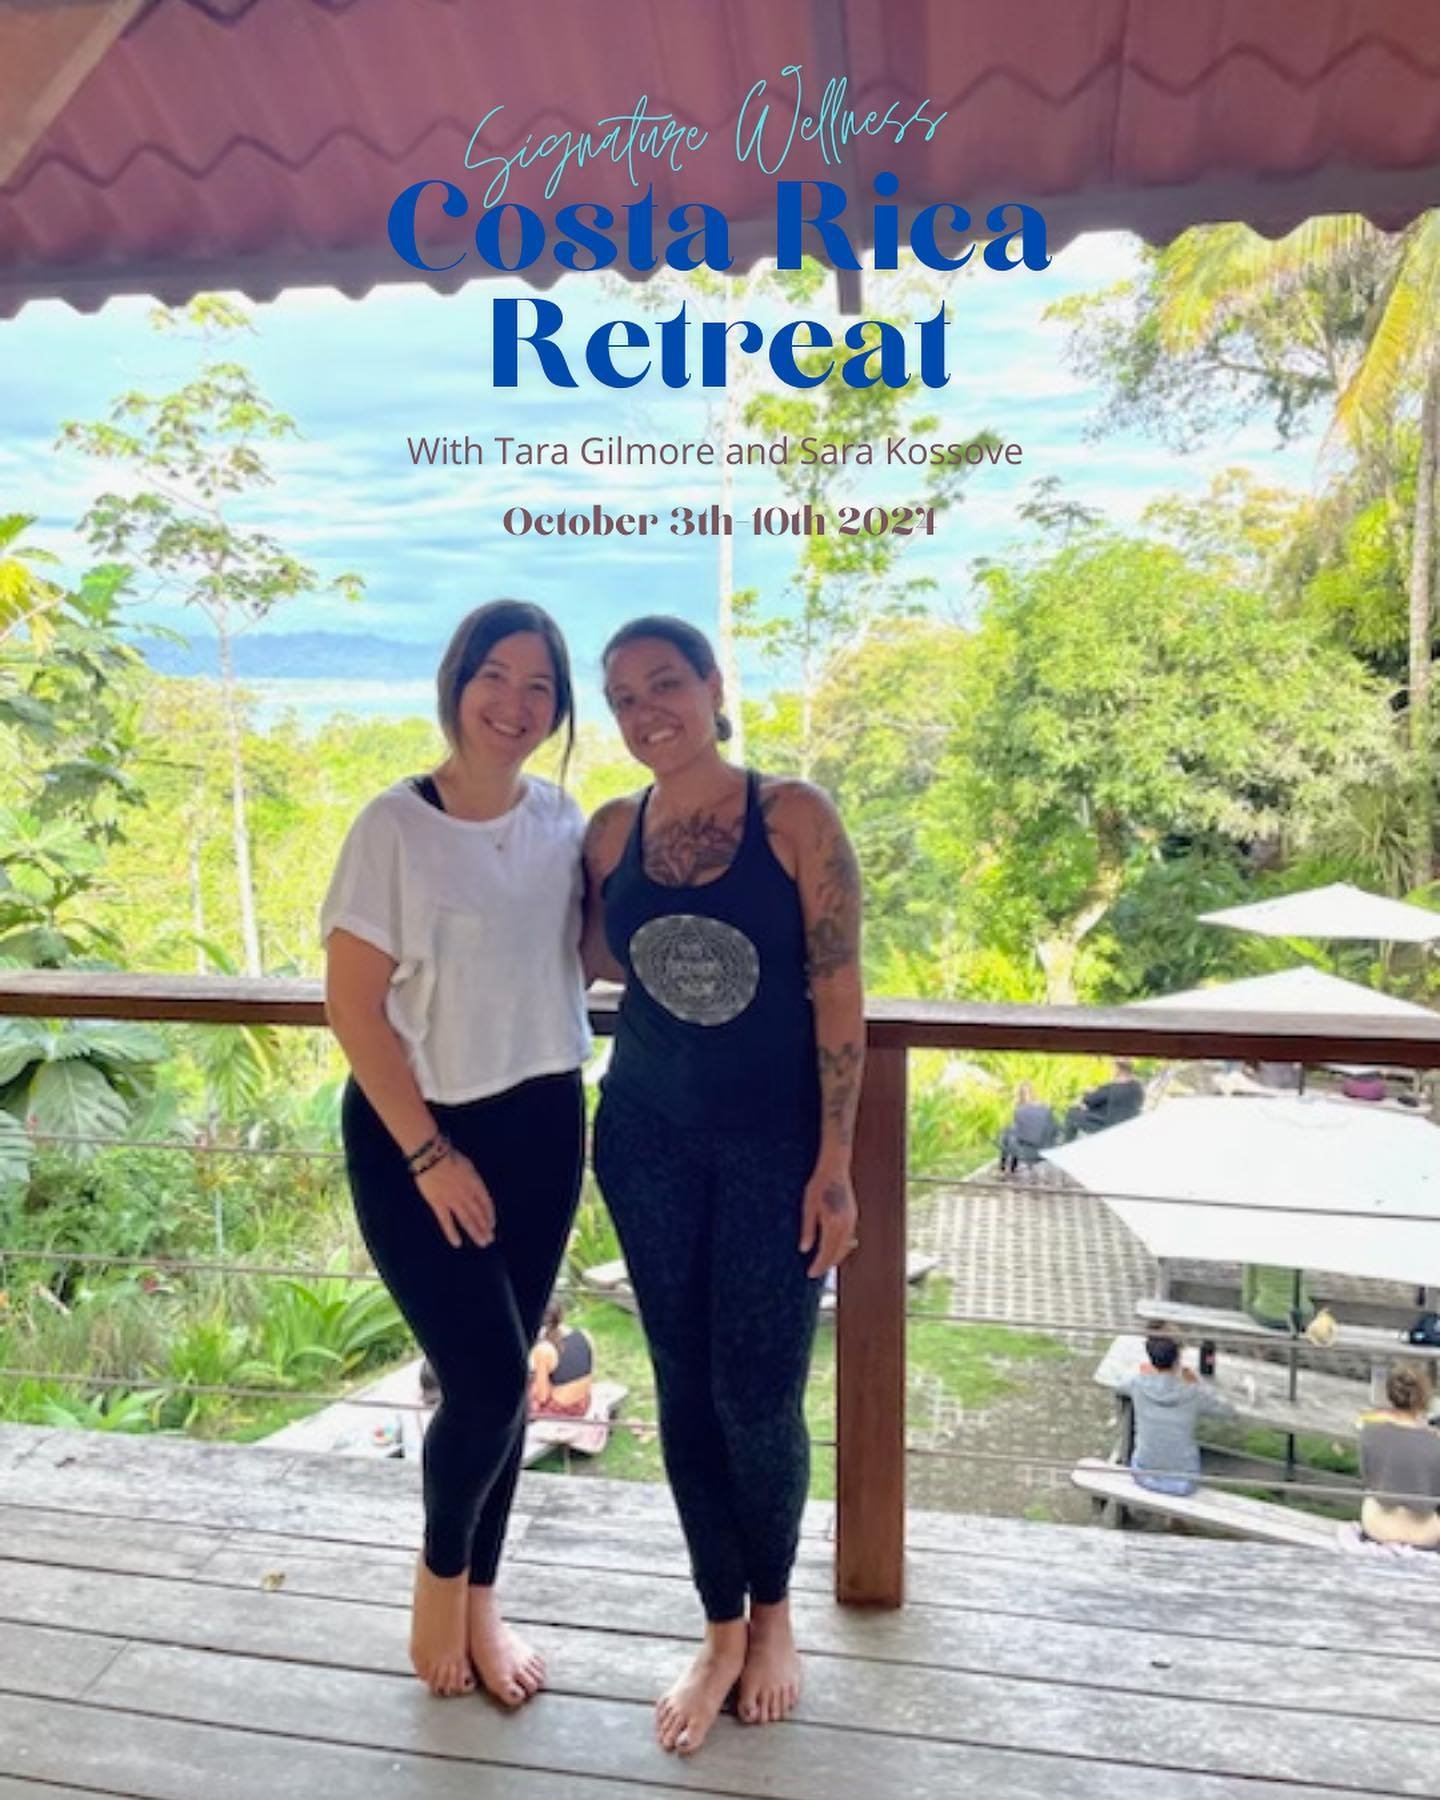 Its time for YOU to treat yourself!
How about an all inclusive wellness retreat to the Caribbean of Costa Rica?! 🌺

We are gearing up for our Annual Signature Costa Rica Wellness Retreat! 

Come check out the magic of the Caribbean and enjoy a week 